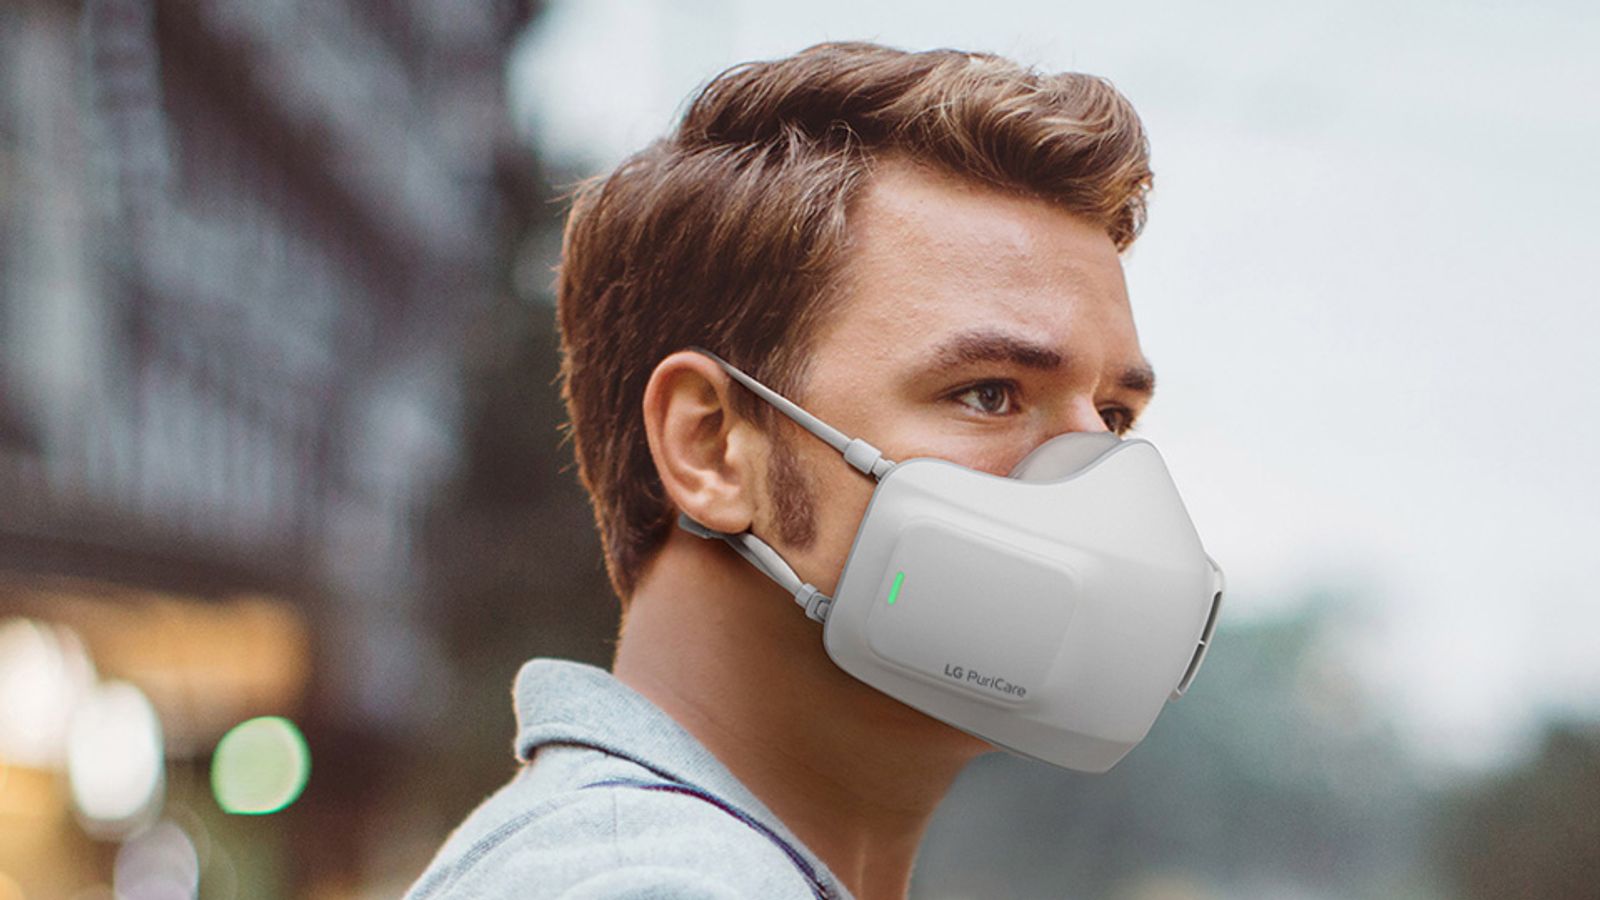 Coronavirus: LG unveils battery-powered experience mask dubbed ‘wearable air purifier’ | United kingdom Information